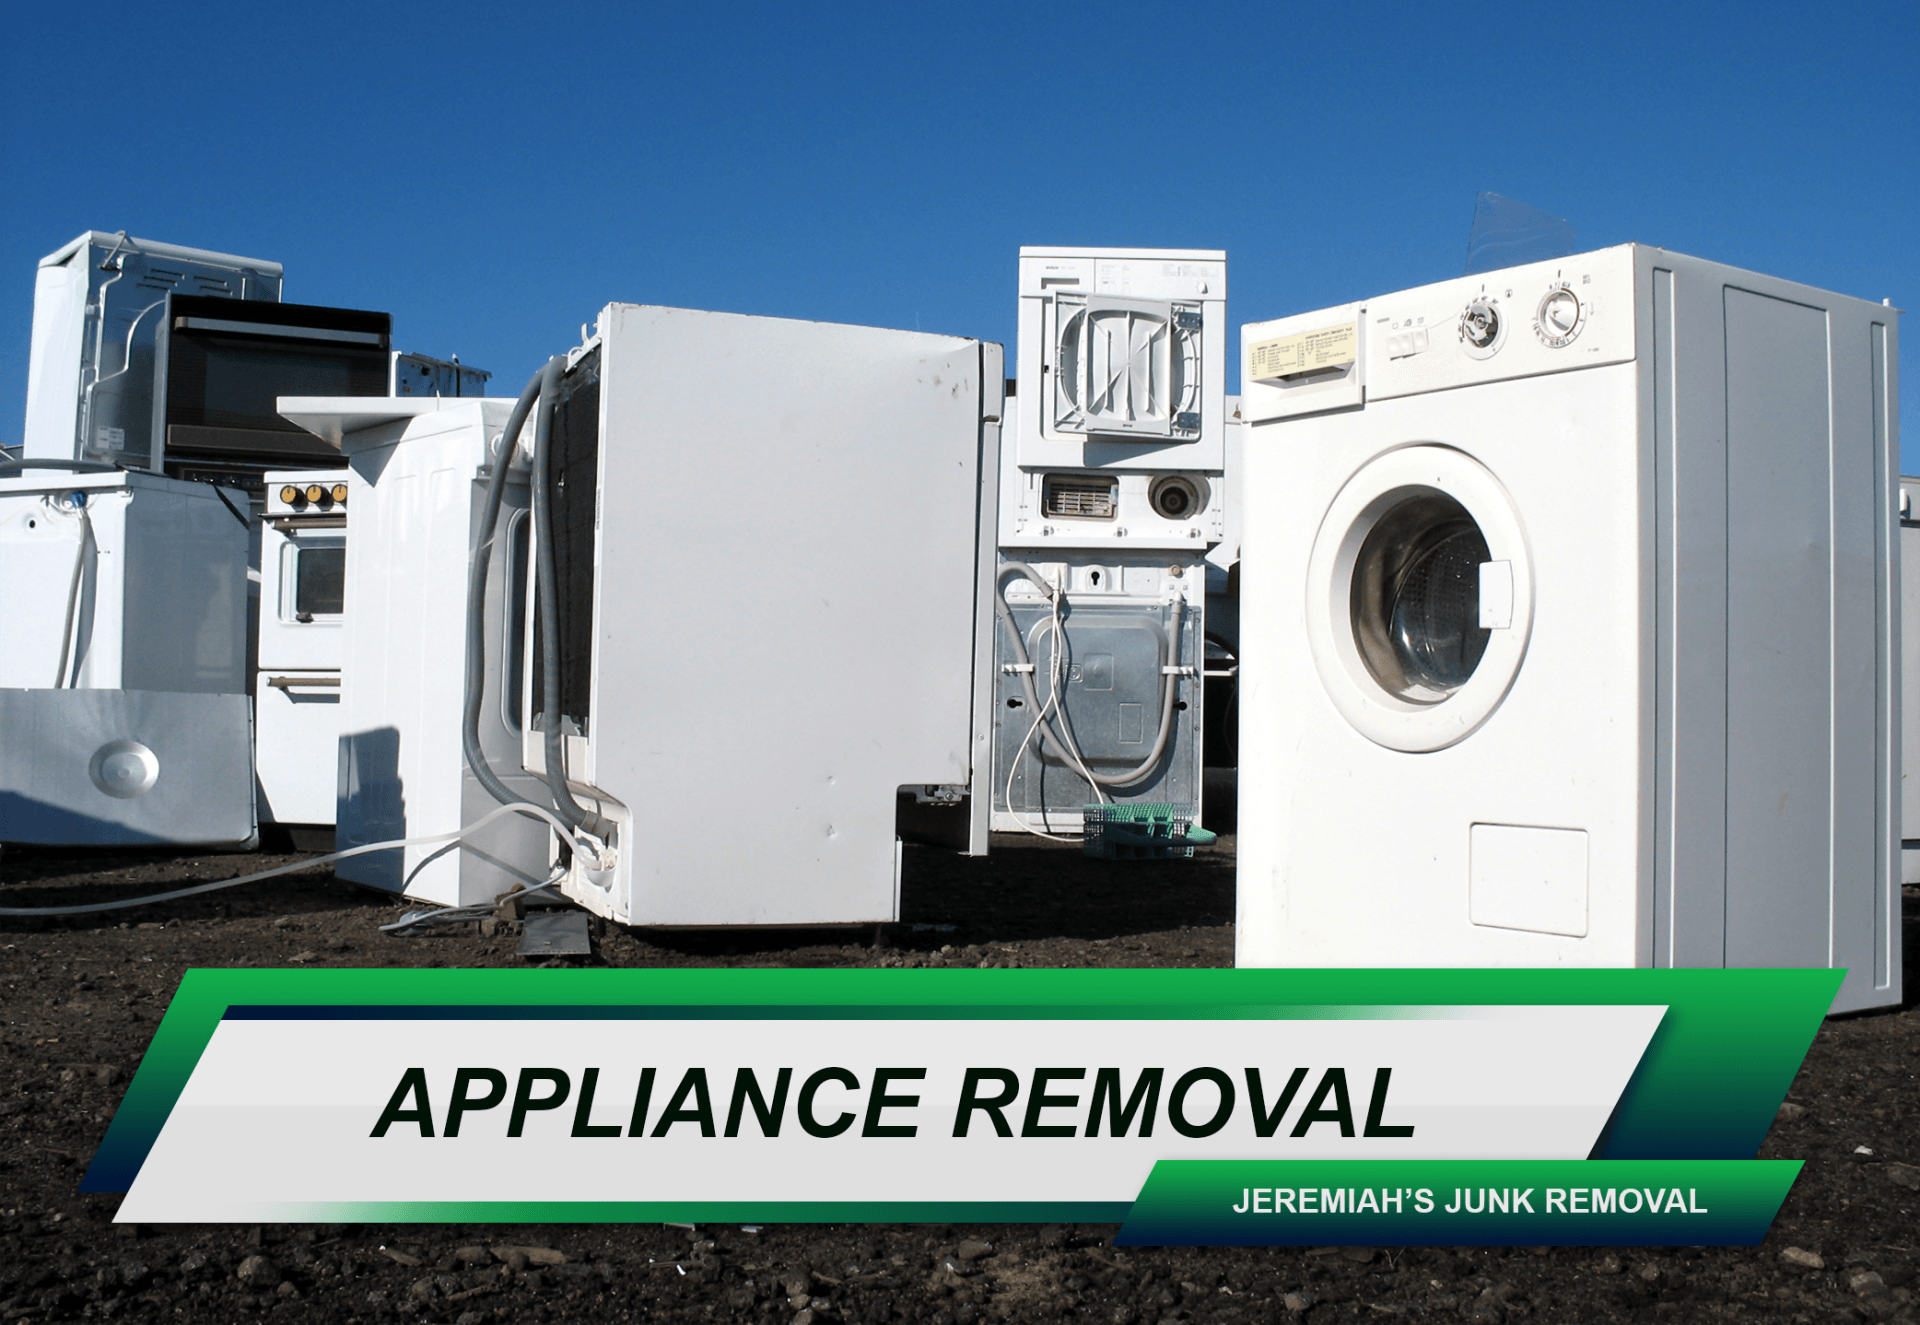 Appliance removal Floral Park, NY